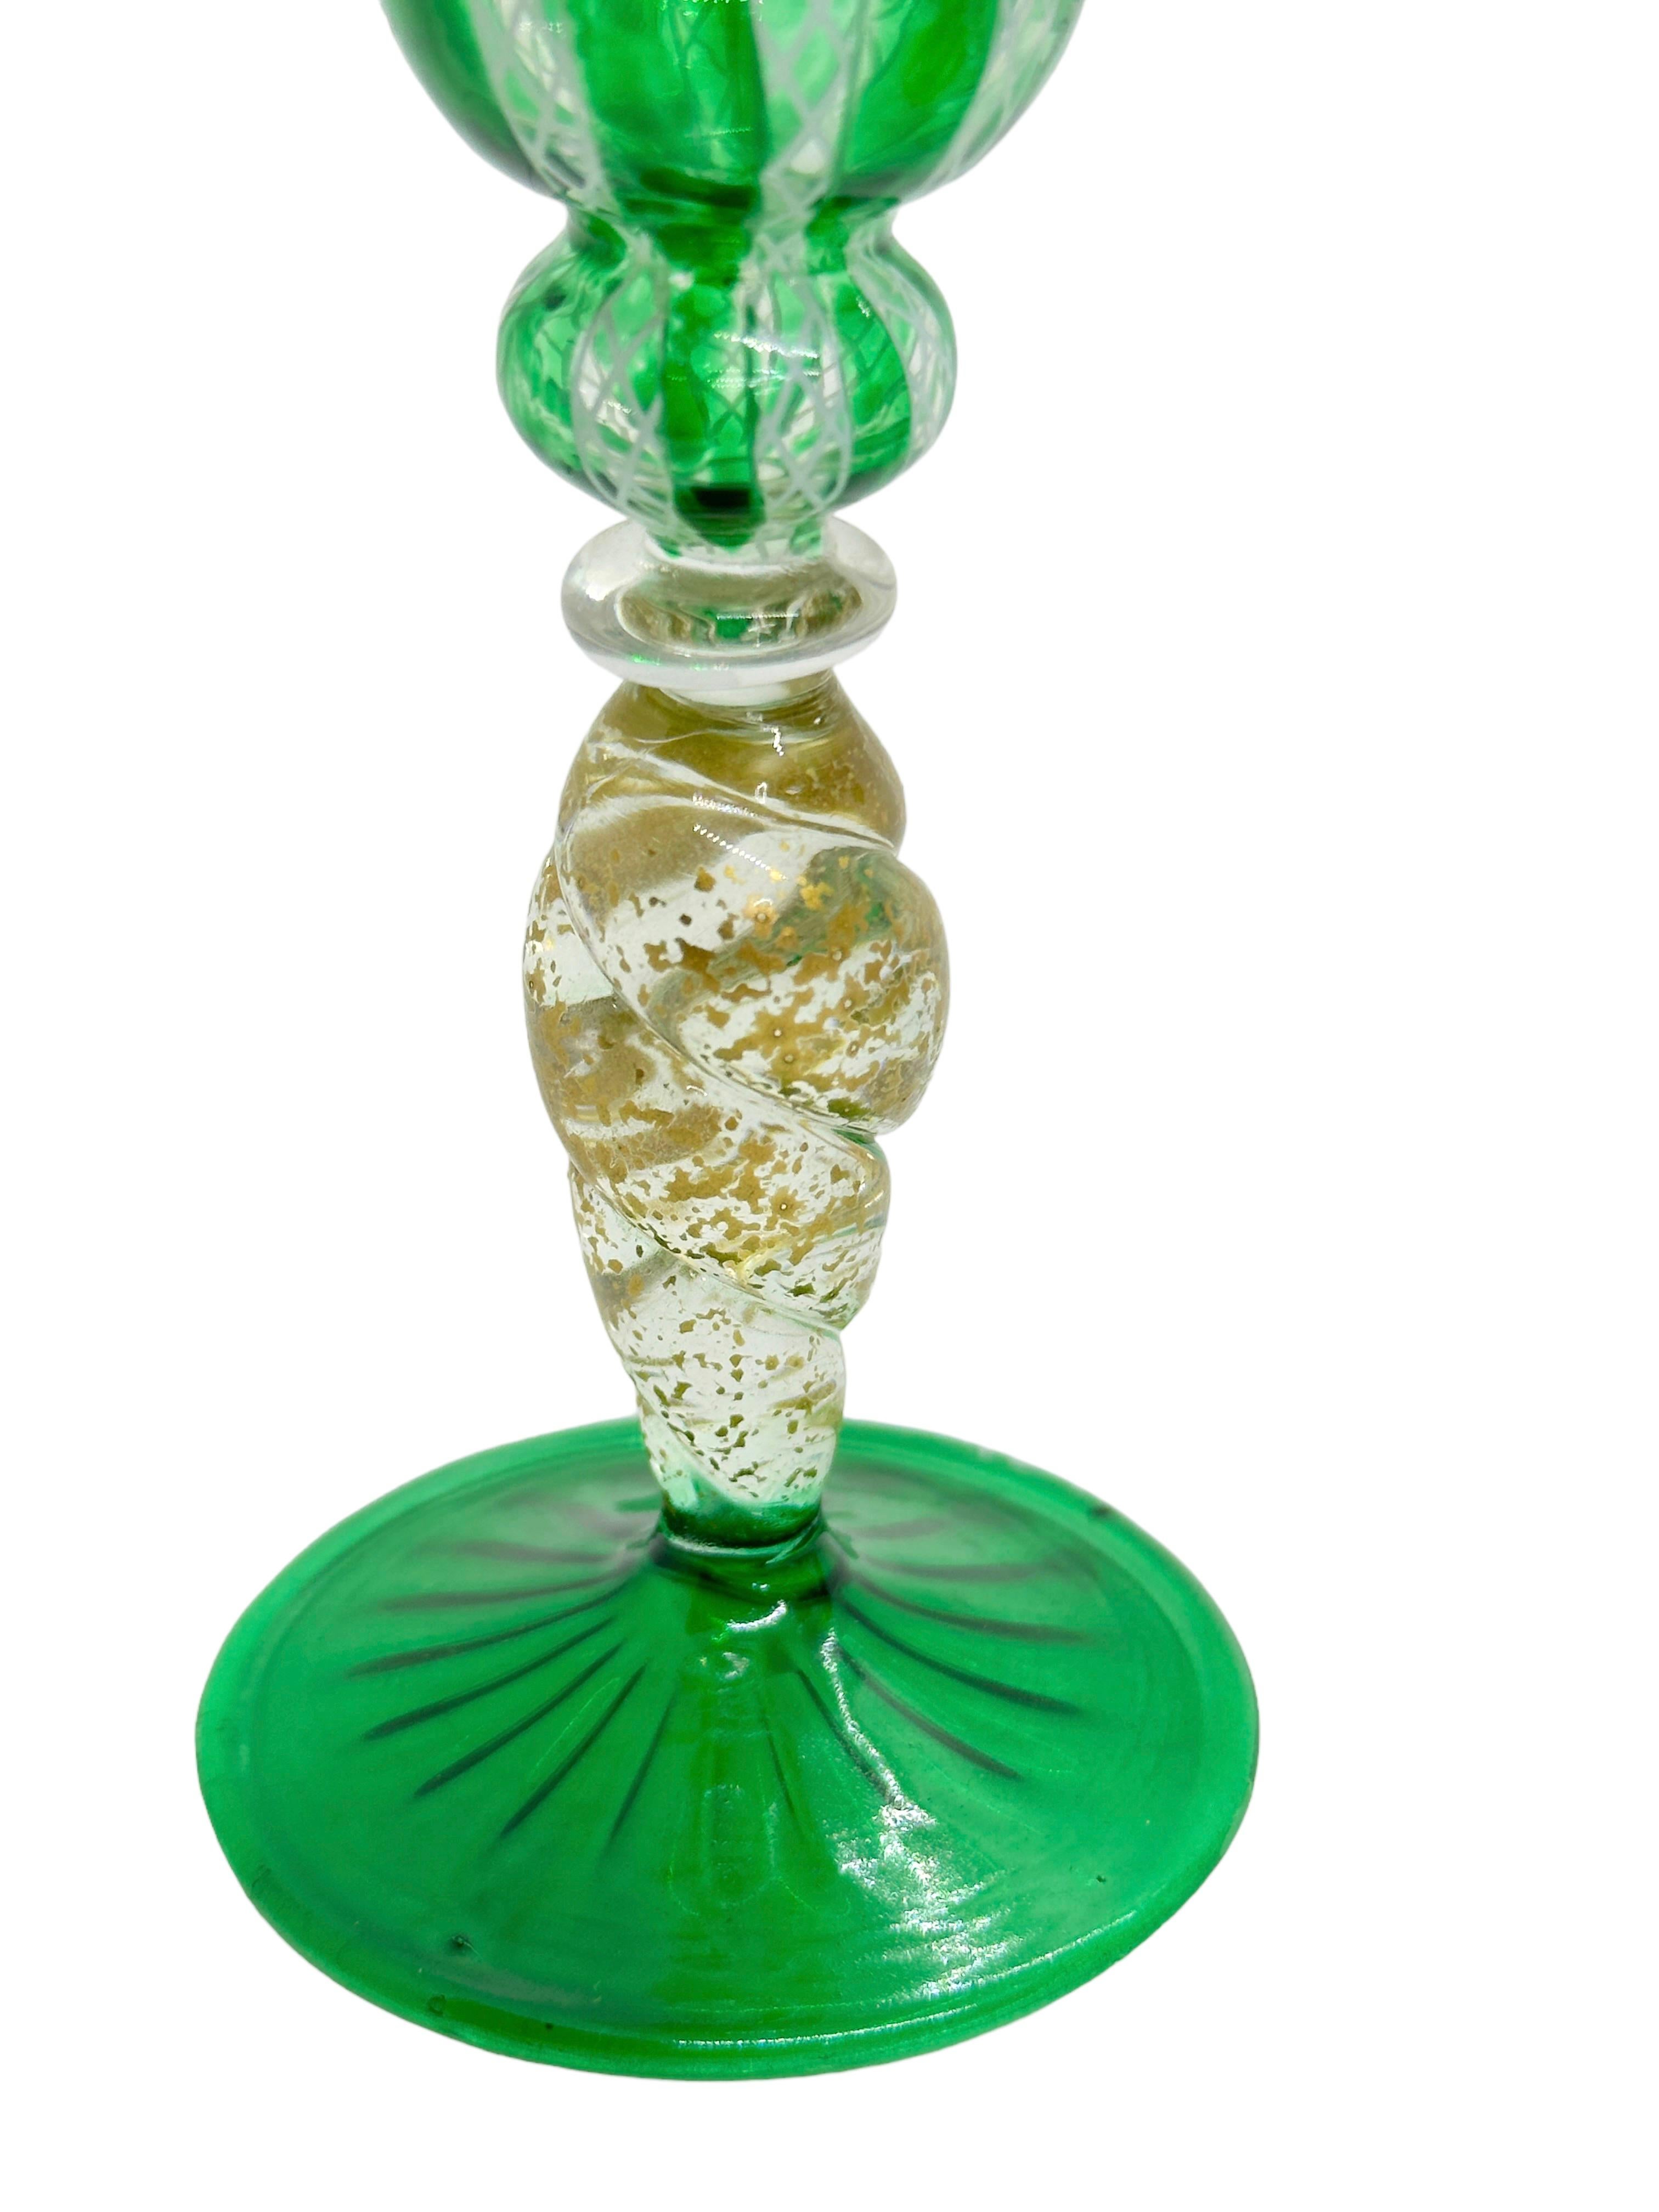 Green & Gold Stardust Salviati Murano Glass Liqueur Goblet, Vintage Italy  For Sale 3